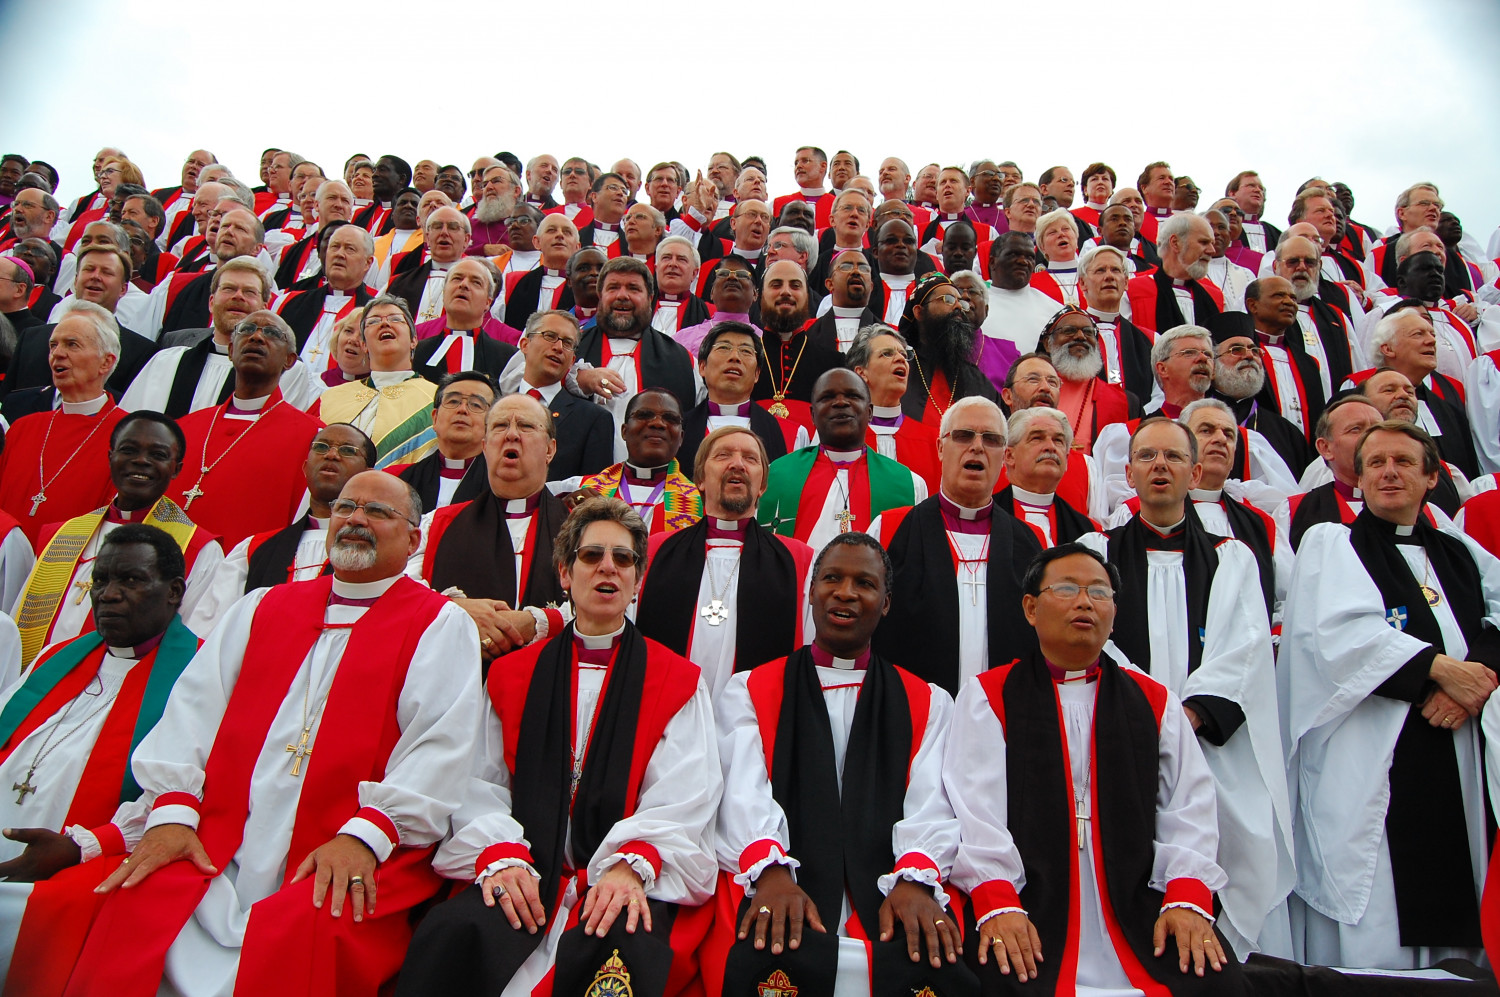 Bishops at a previous Lambeth conference